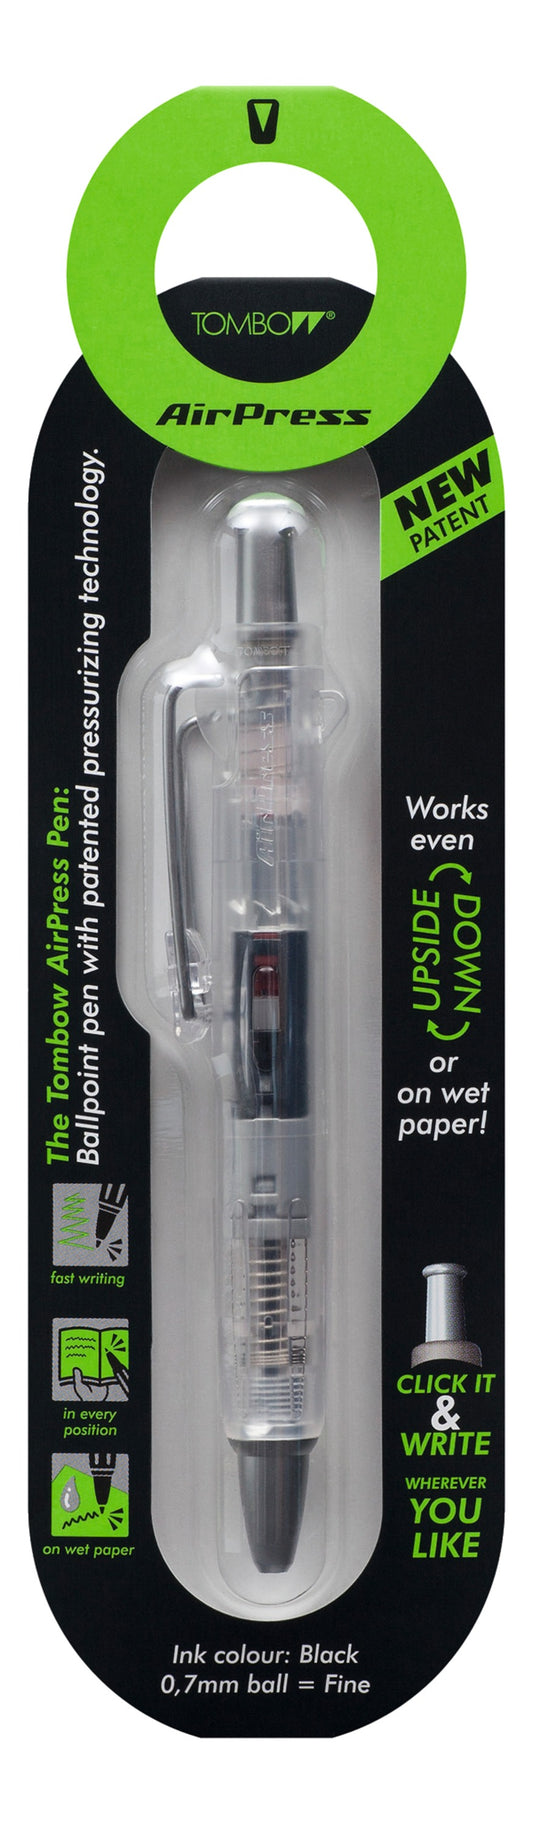 Tombow AirPress Retractable Ballpoint Pen 0.7mm Tip Transparent Barrel Black Ink - BC-AP20 - NWT FM SOLUTIONS - YOUR CATERING WHOLESALER